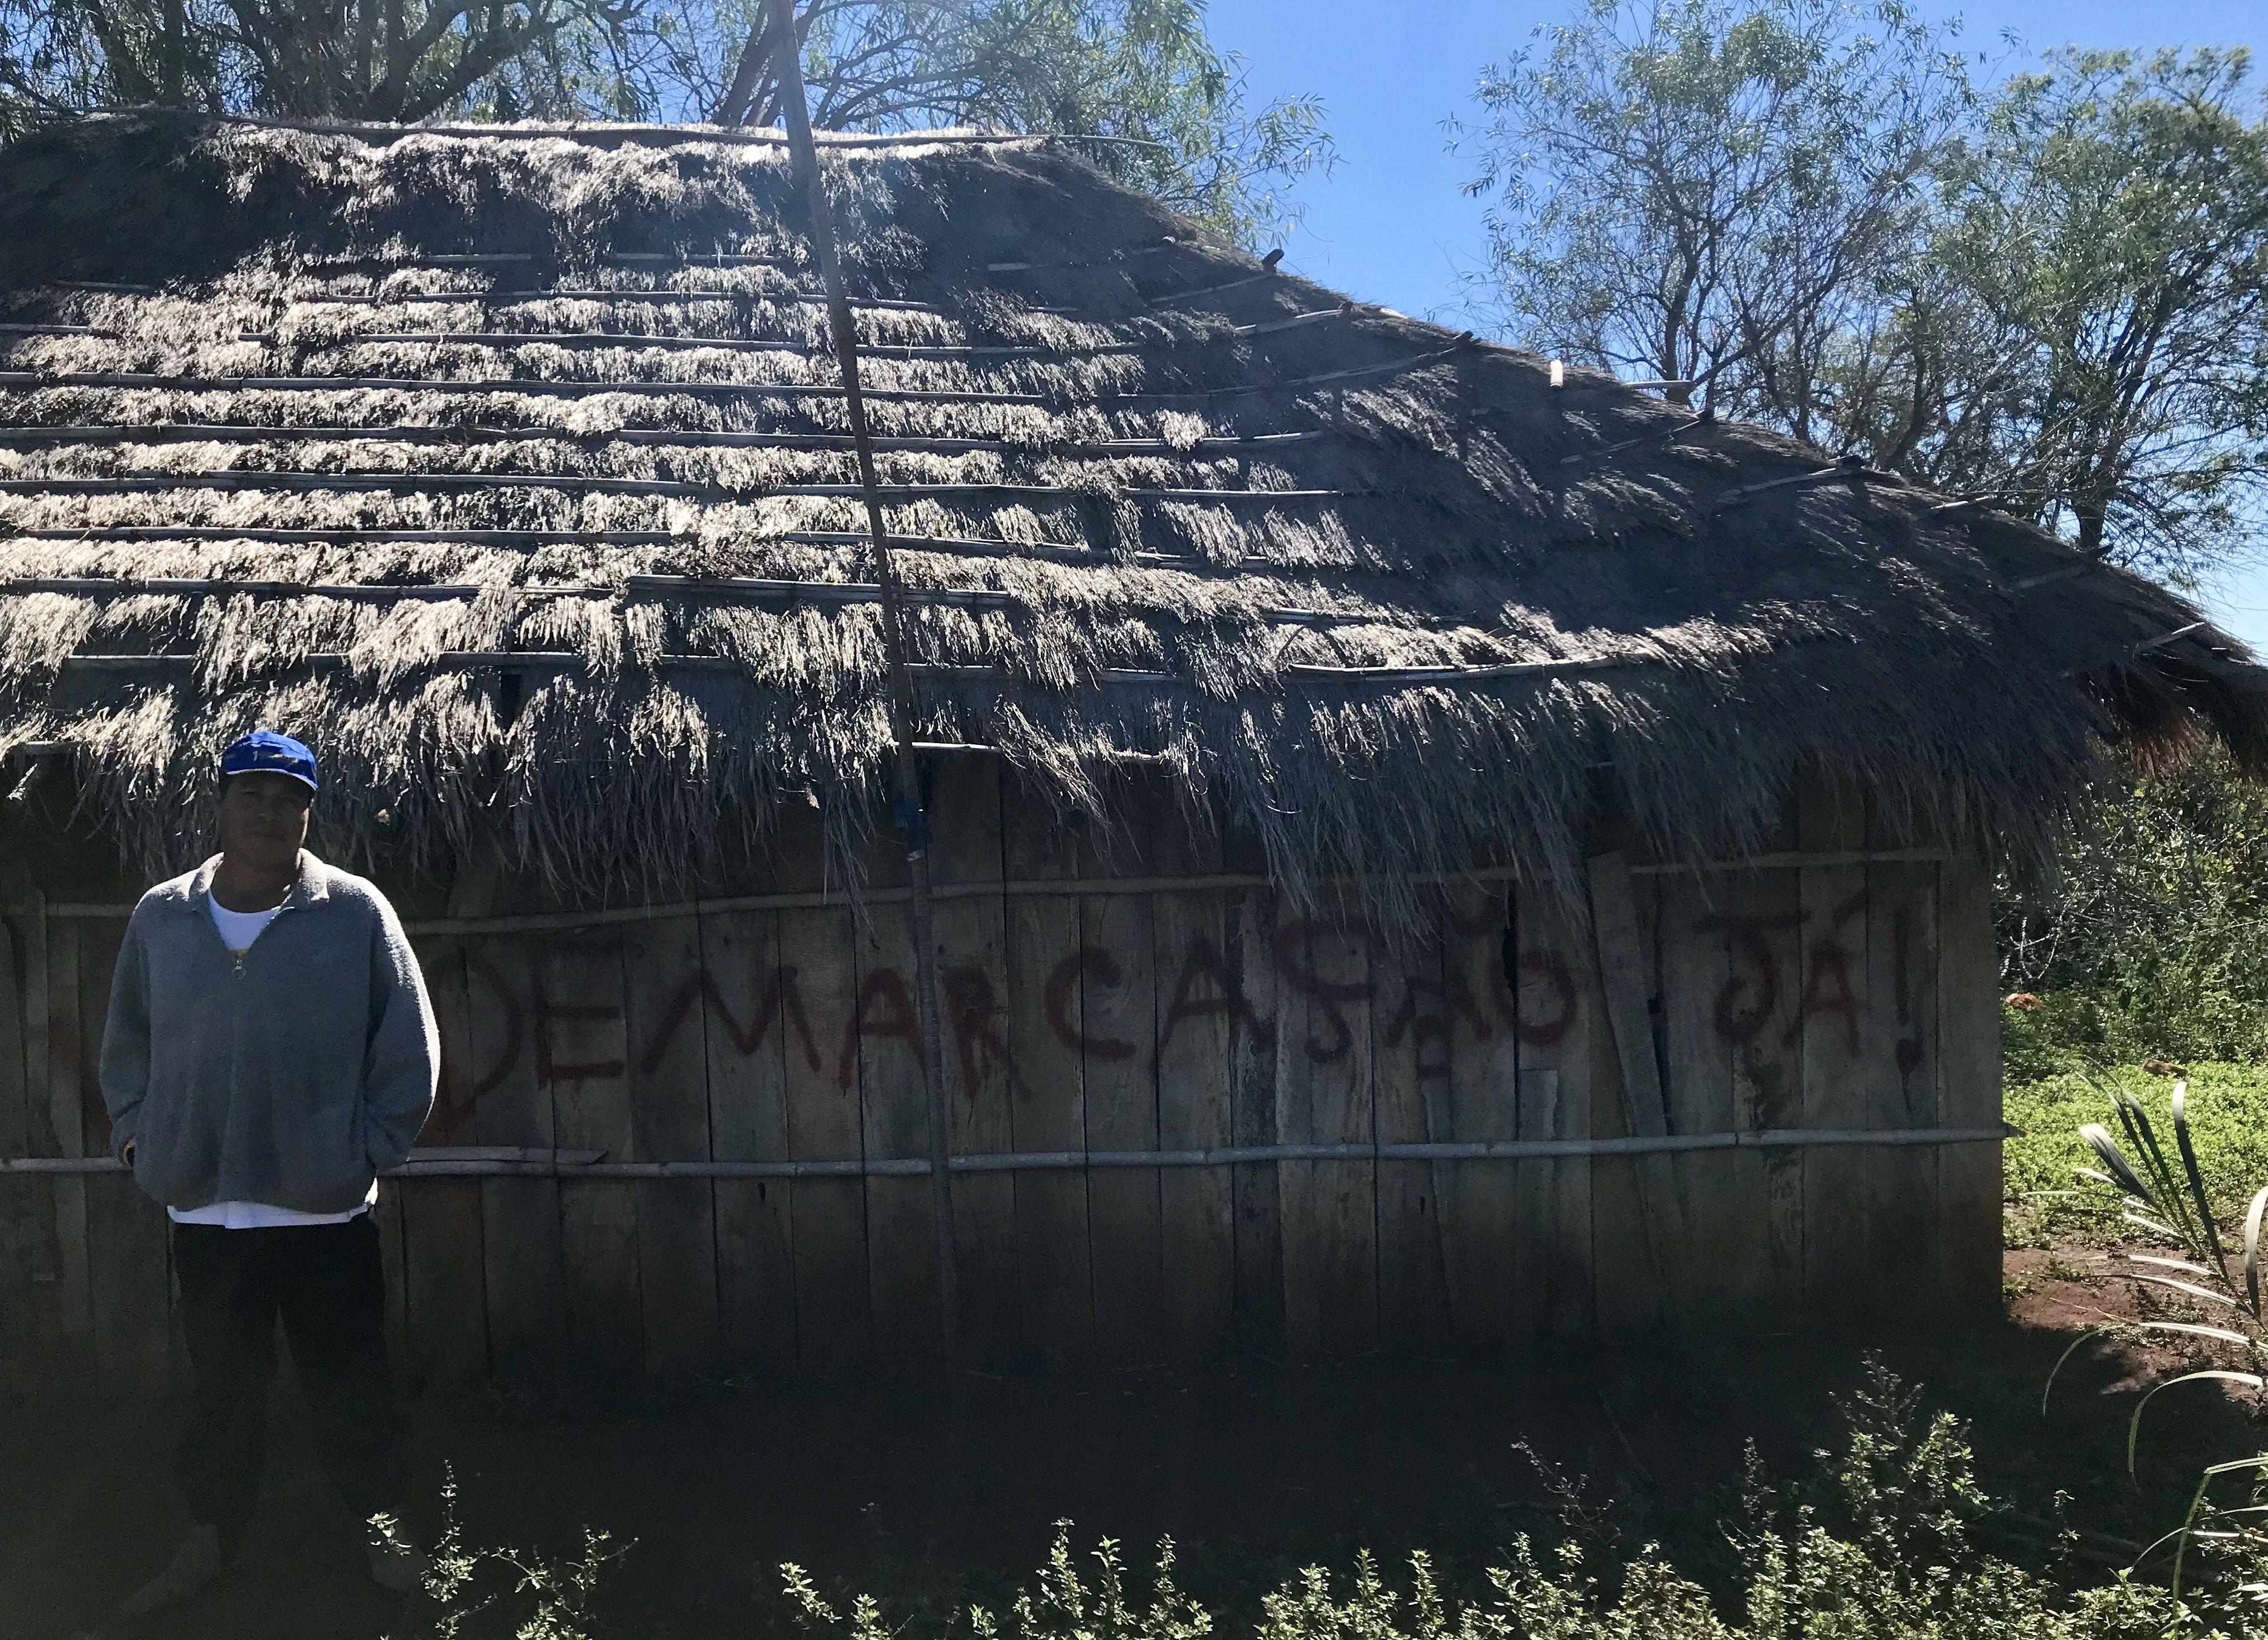 Cacique (or "Chief") Ezequiel João in front of the walls of his residence. "Demarcação Já!" (or "Demarcation Now!" is written as a form of protest to the government's long delay in demarcating and protecting the territories that were promised to his village. Image by Rafael Lima. Brazil, 2019.